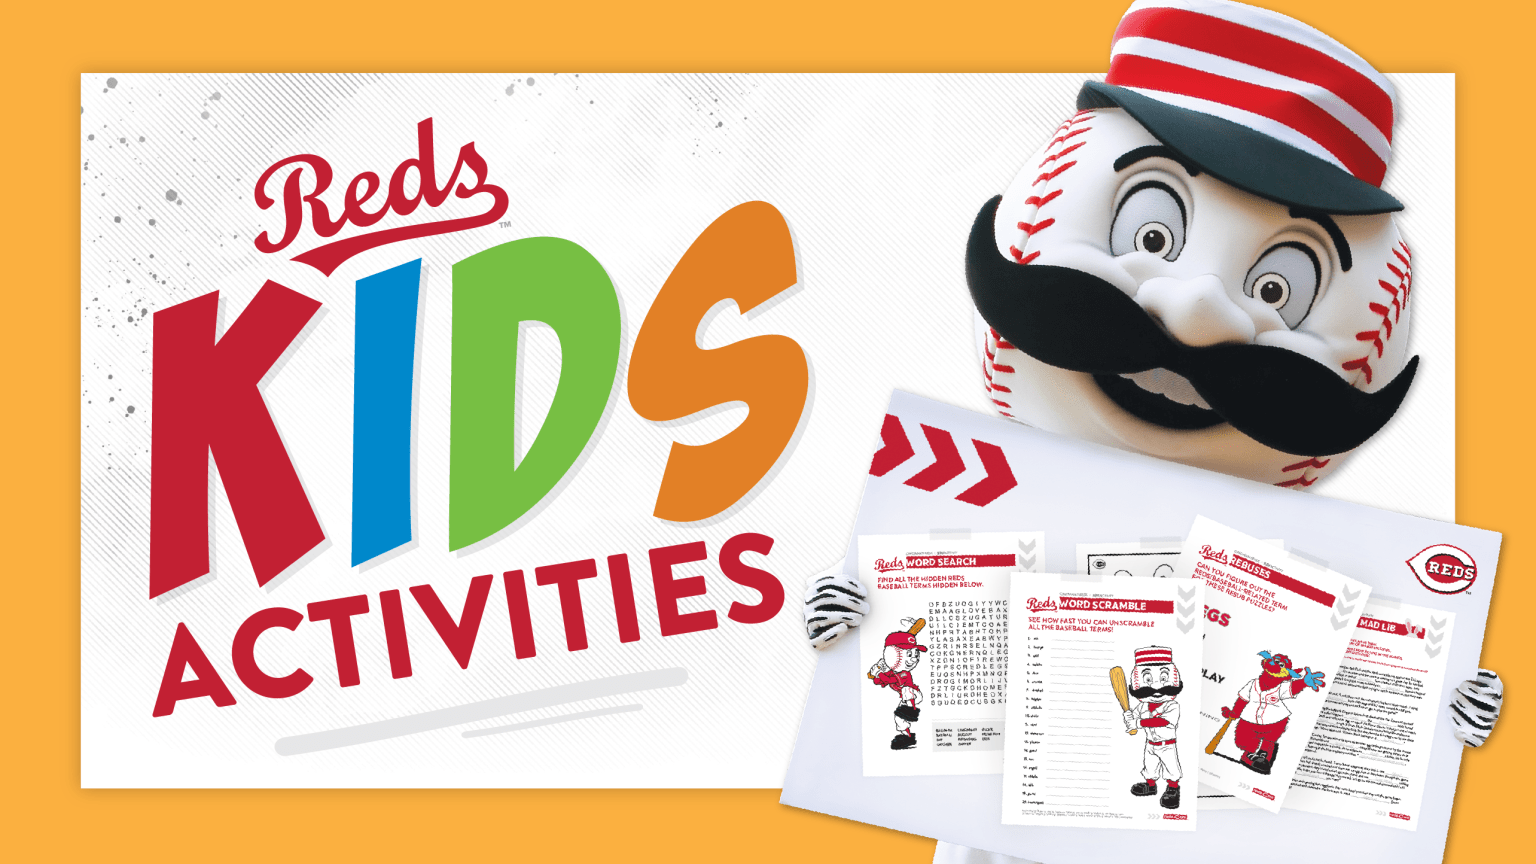 How to Navigate a Reds Game with Kids